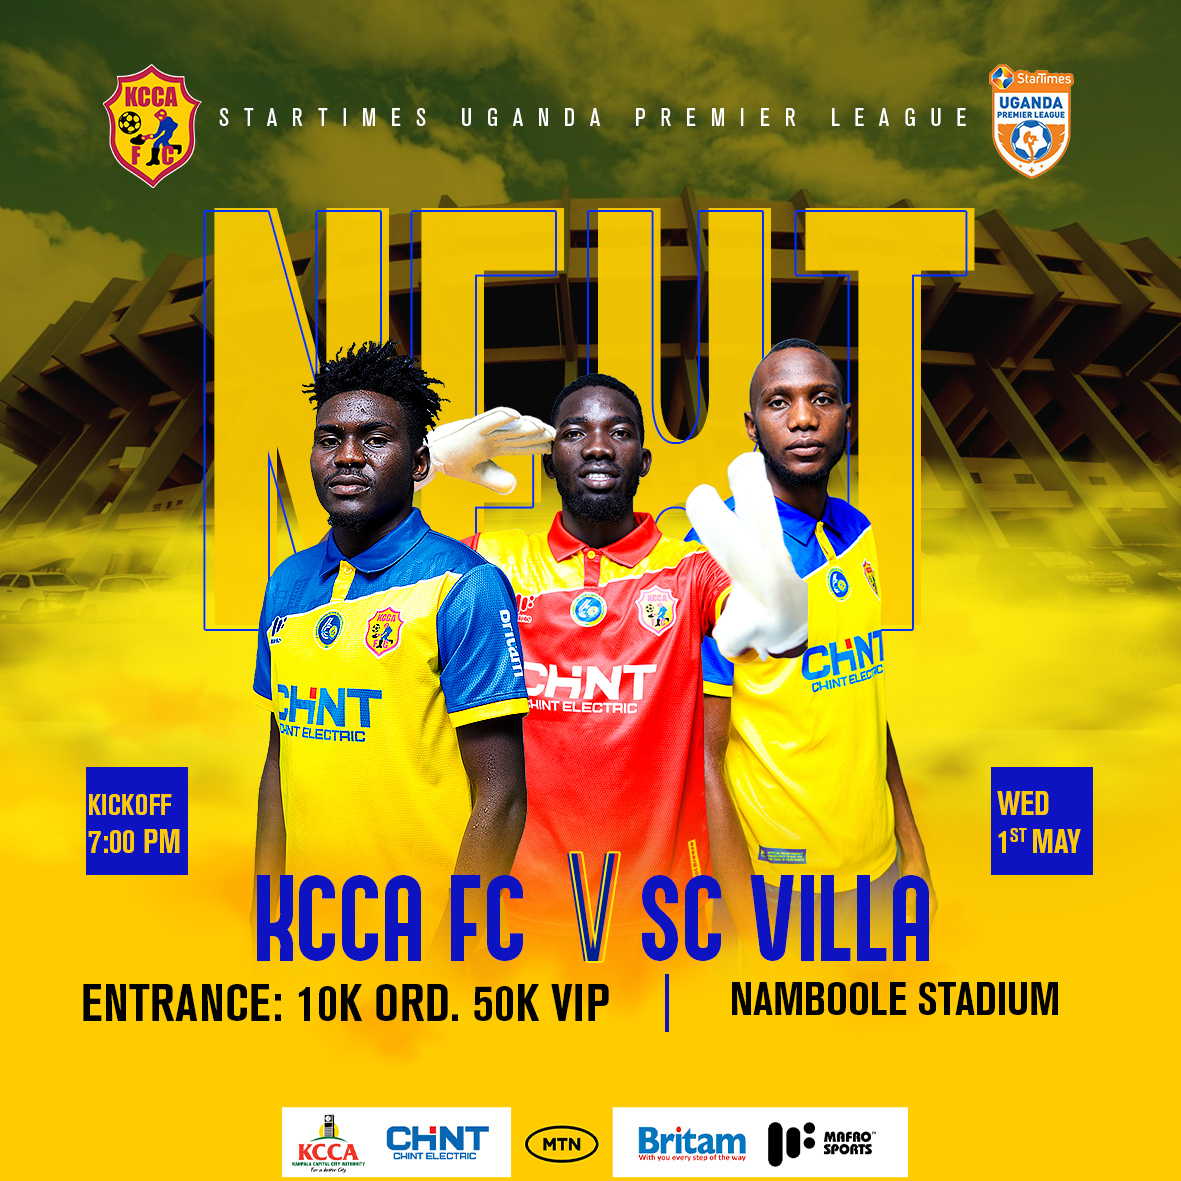 💛💛💛💛 Namboole's Yellow Wave. Rise and Shine! Wear your brightest yellow as we clash with Villa in the newly refurbished fortress. Let's paint the stands yellow and roar them to victory! #KCCAFC #KCCASCV #StarTimesUPL #KCCAFC60